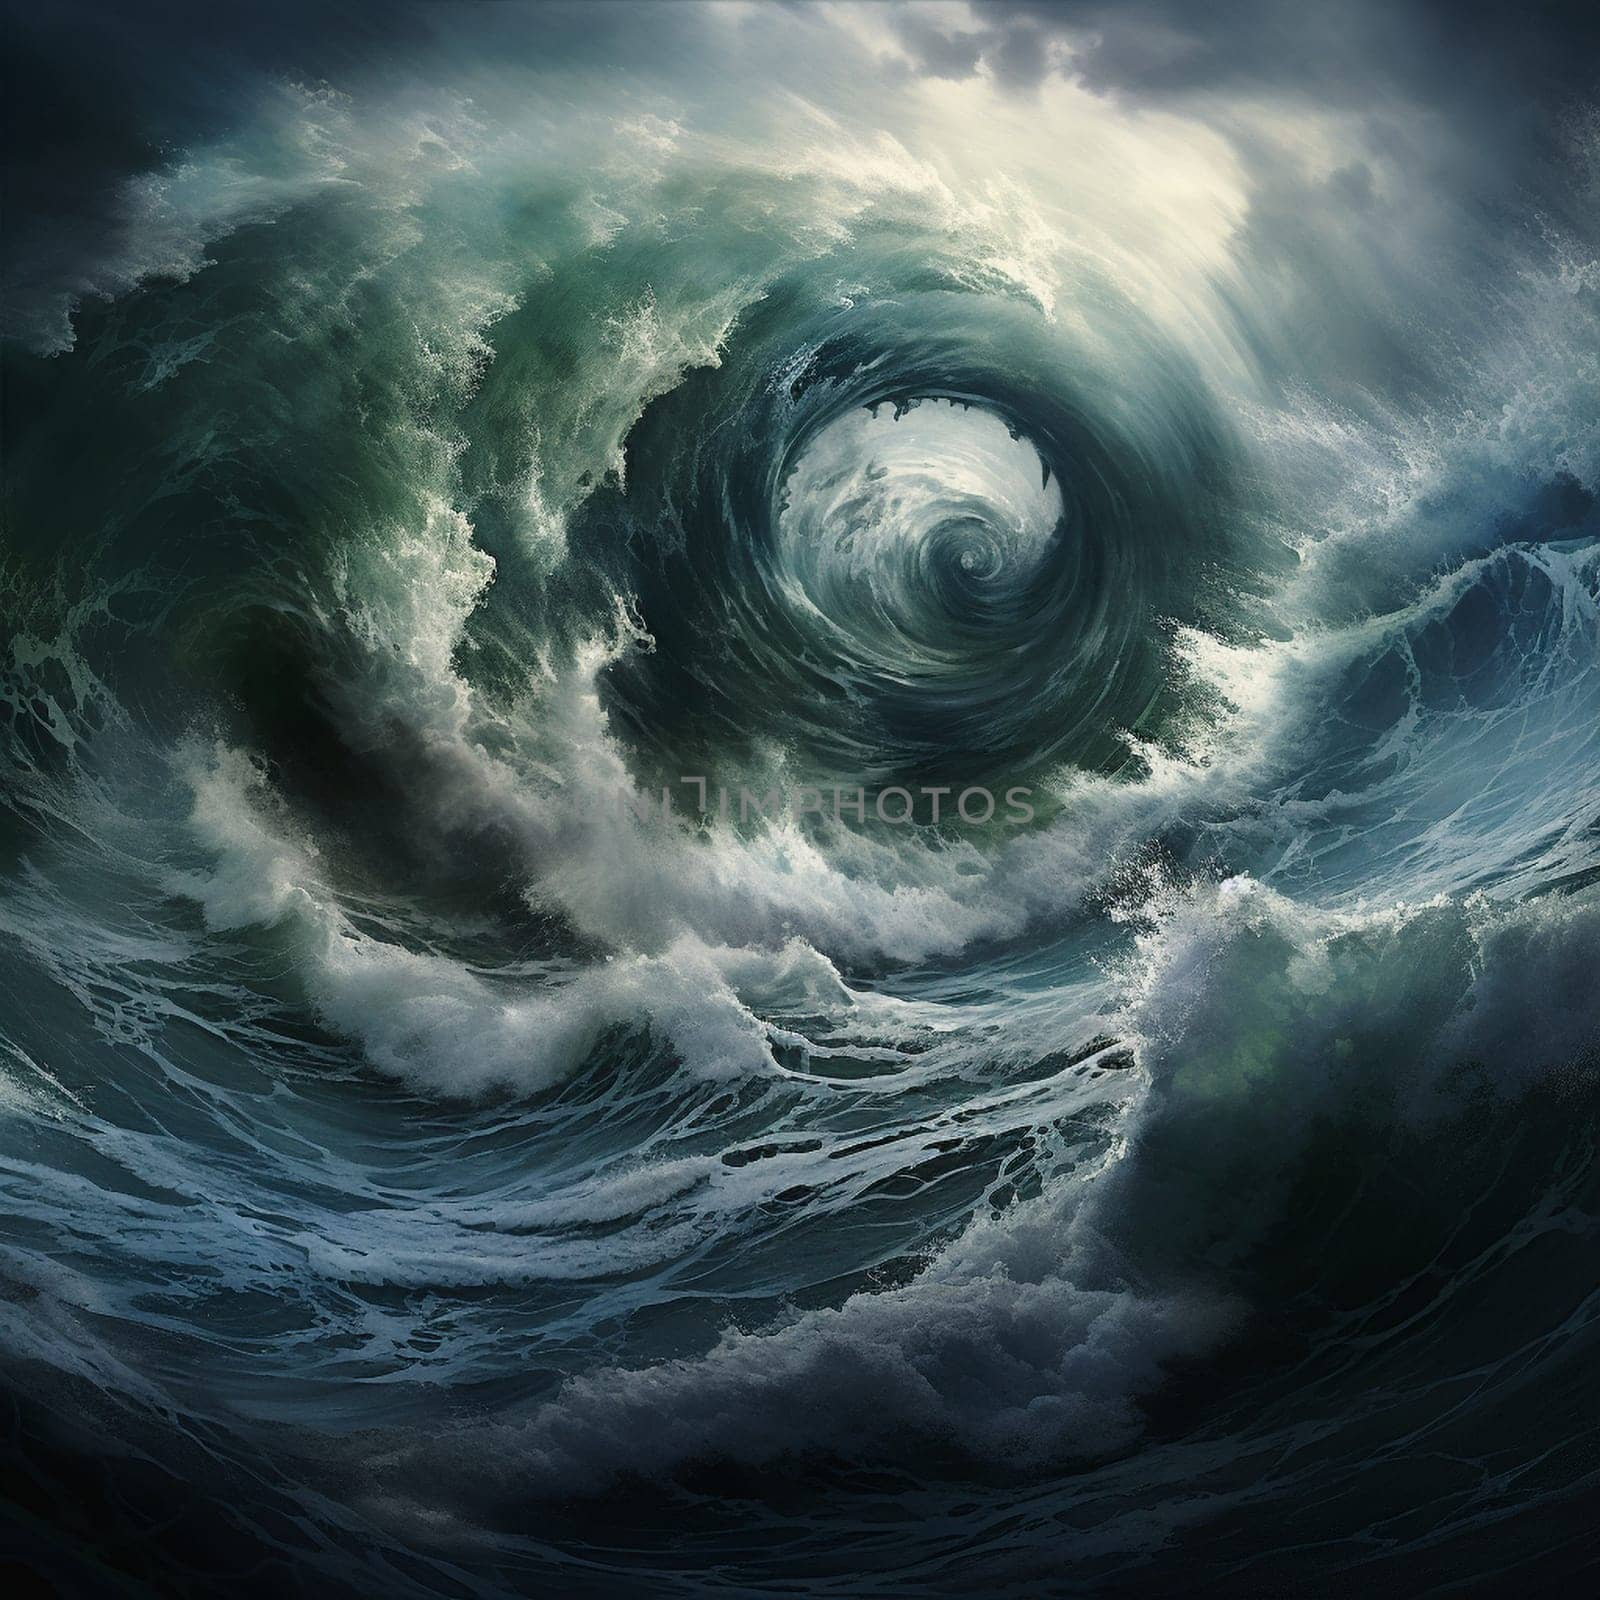 Get ready to be mesmerized by the captivating power of nature with the image of a majestic maelstrom! This swirling vortex of water and mist commands attention with its sheer force and beauty. This image portrays the dynamic and ever-changing nature of the oceans, evoking a sense of awe and wonder.